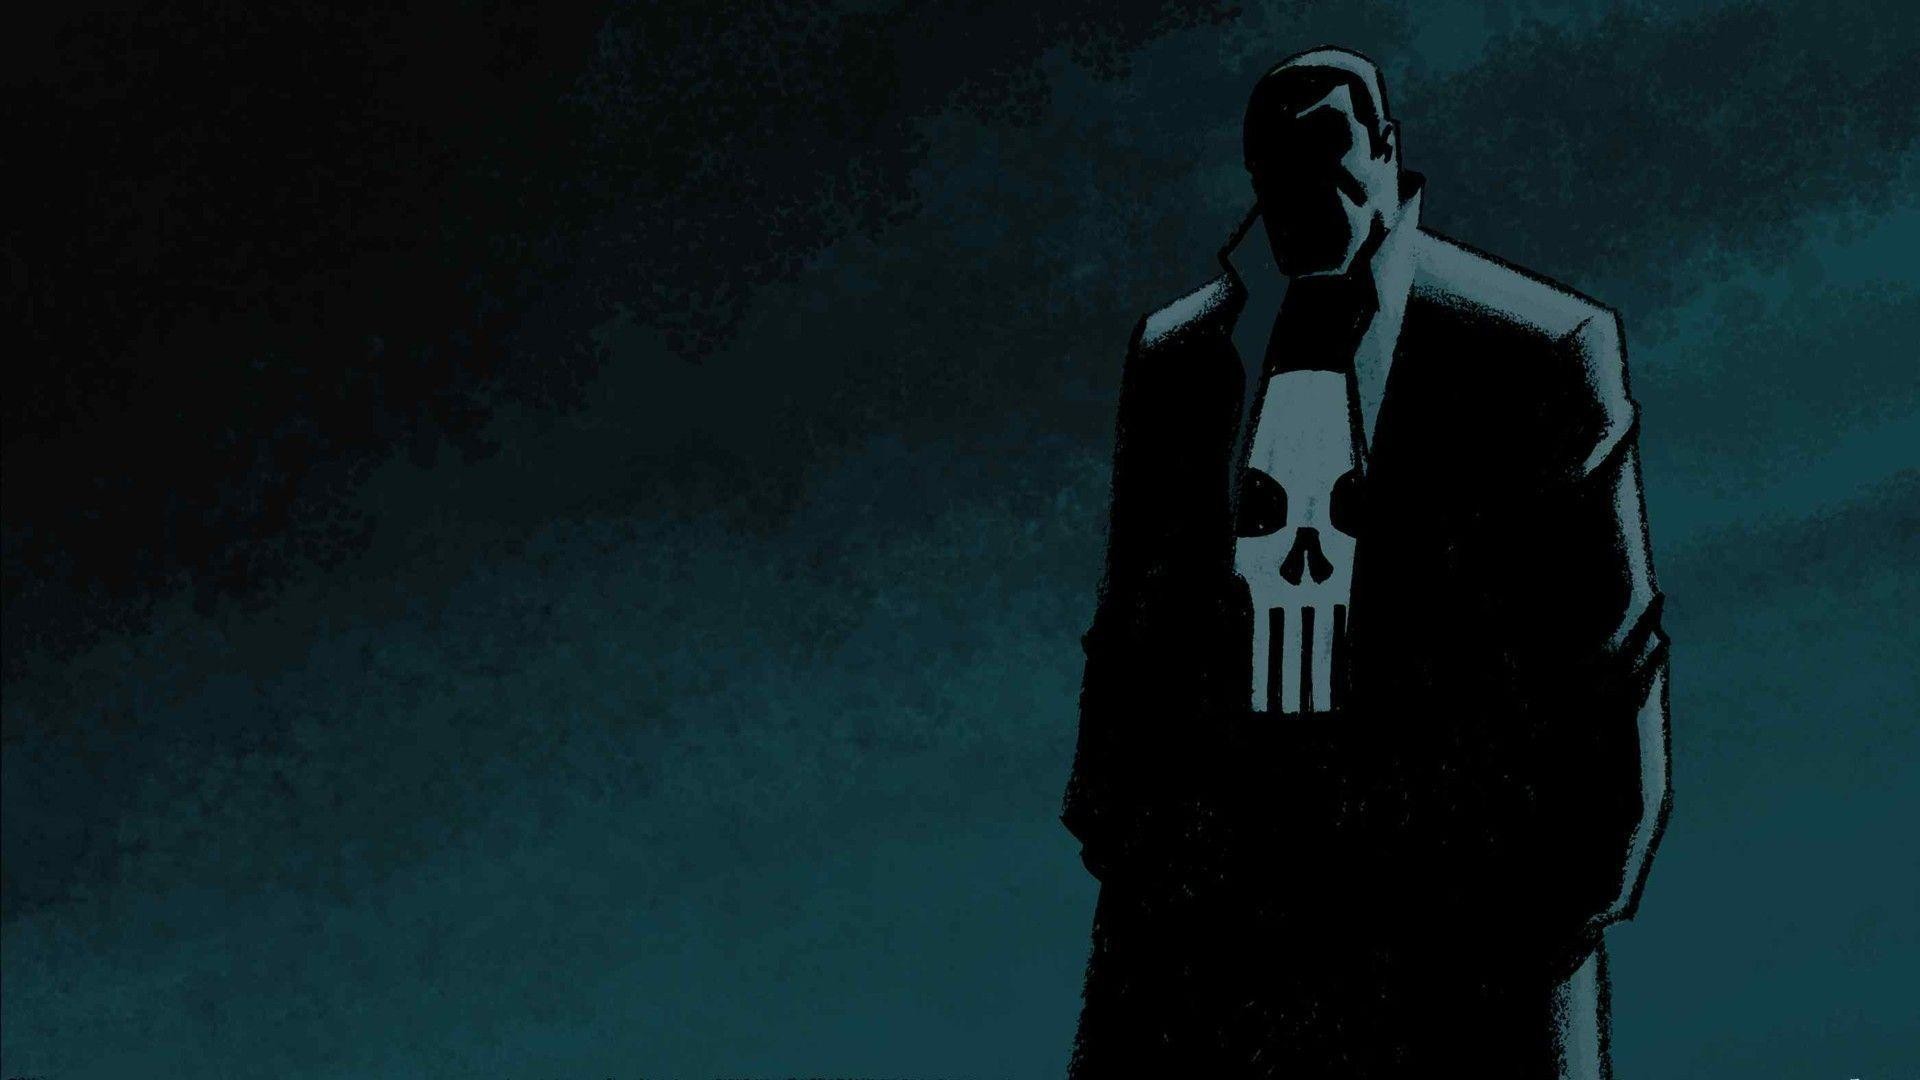 1920x1080 Full View and Download The Punisher 4 Wallpaper  | Hot HD .